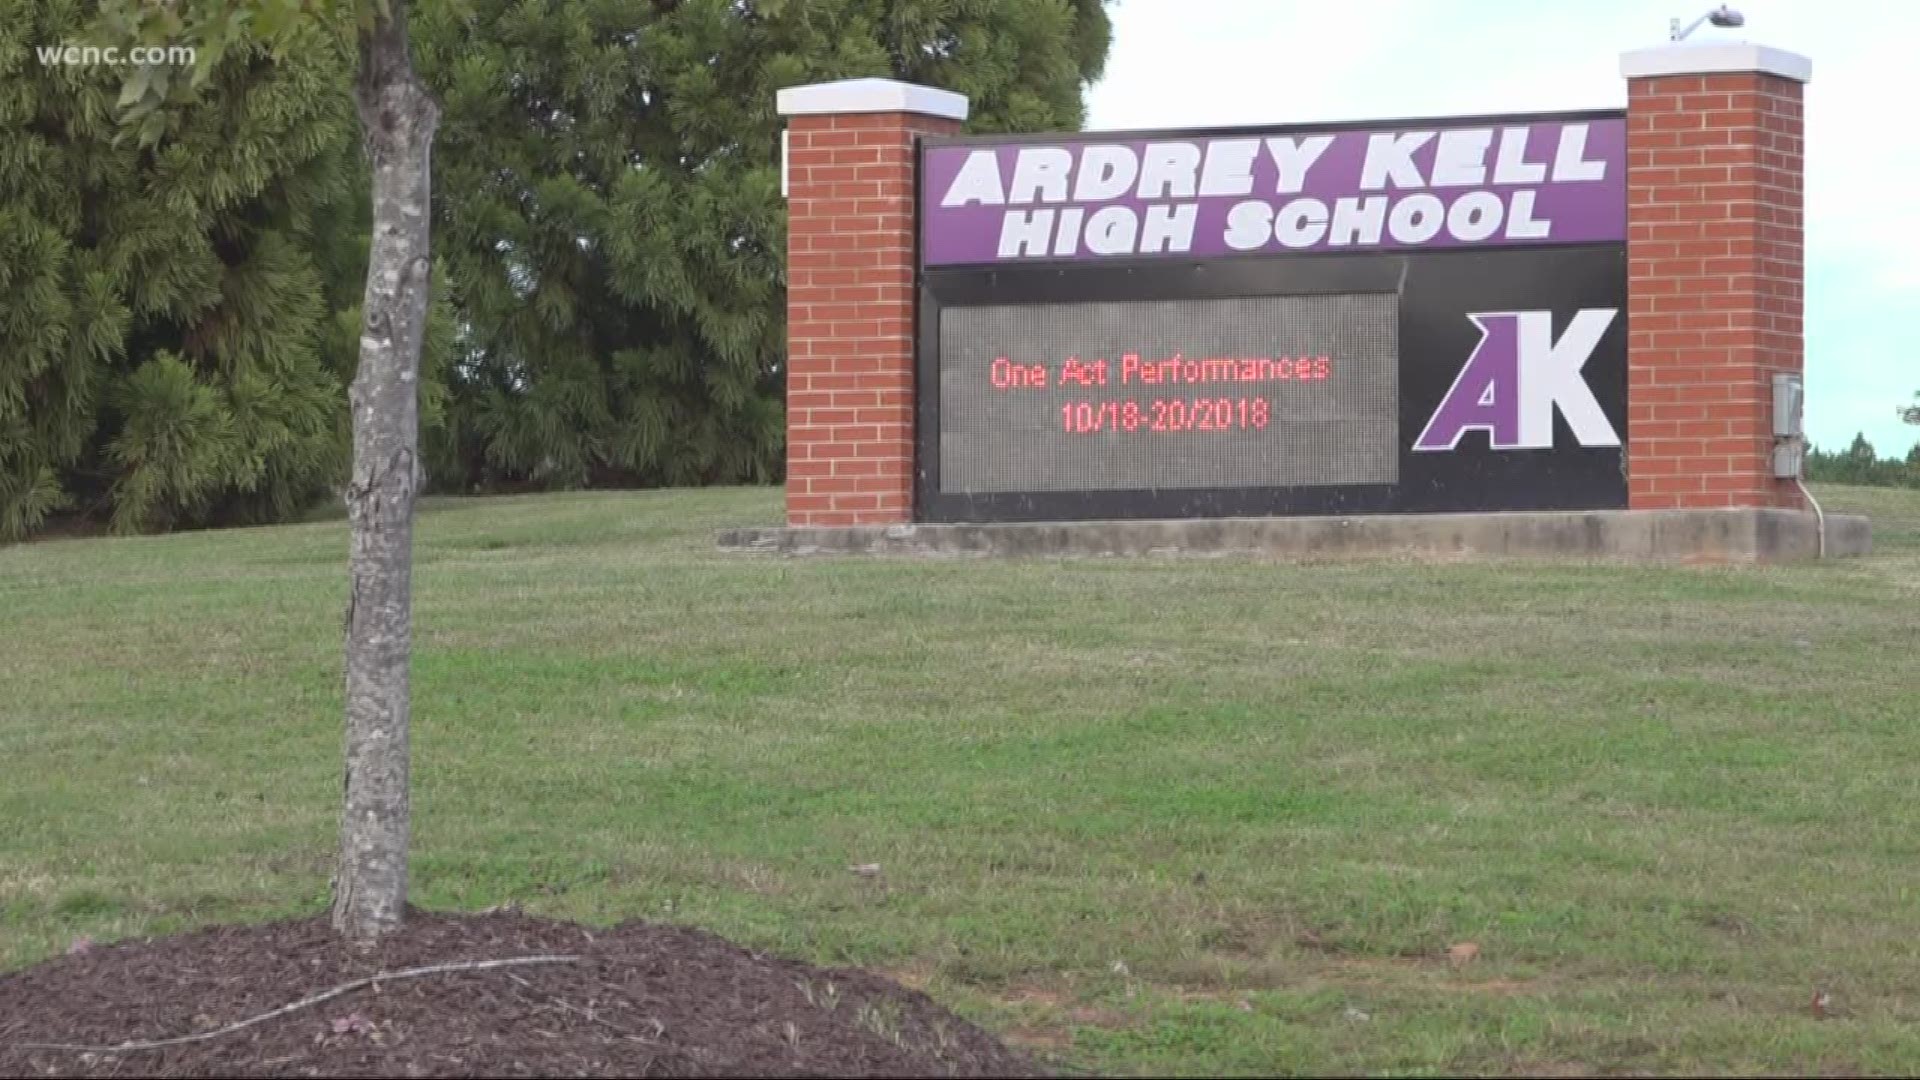 Brian Zelk is suspended with pay from Ardrey Kell after possible inappropriate behavior.